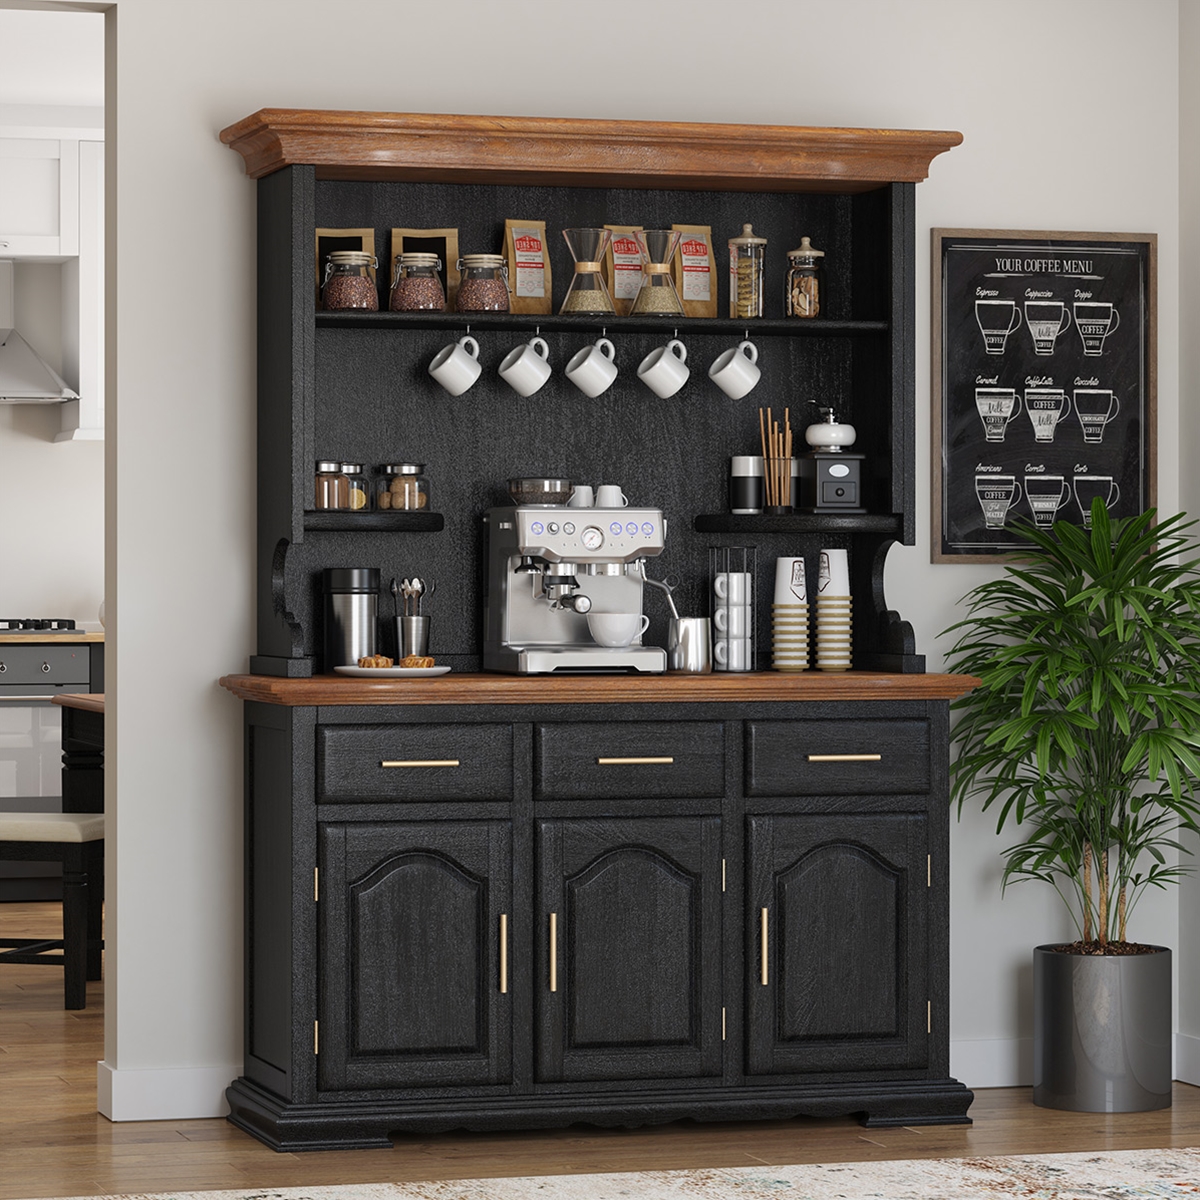 https://www.sierralivingconcepts.com/images/thumbs/0410588_loomis-tall-two-tone-rustic-kitchen-hutch-with-cornice-top.jpeg